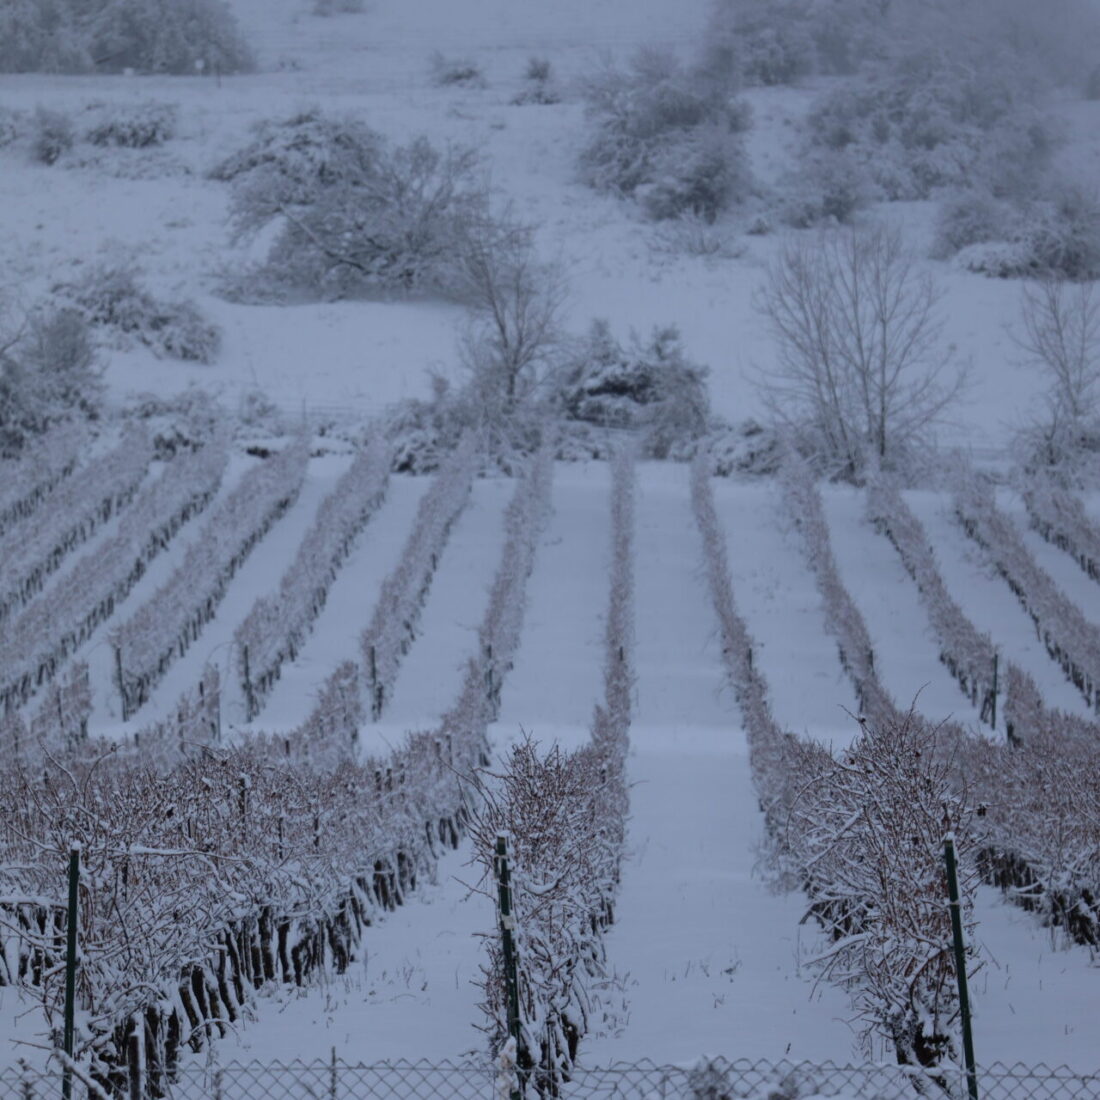 Snow falls on a vineyard in the Golan Heights, Northern Israel, as a heavy storm hits nationwide, January 27, 2022. Photo by Maor Kinsbursky/Flash90